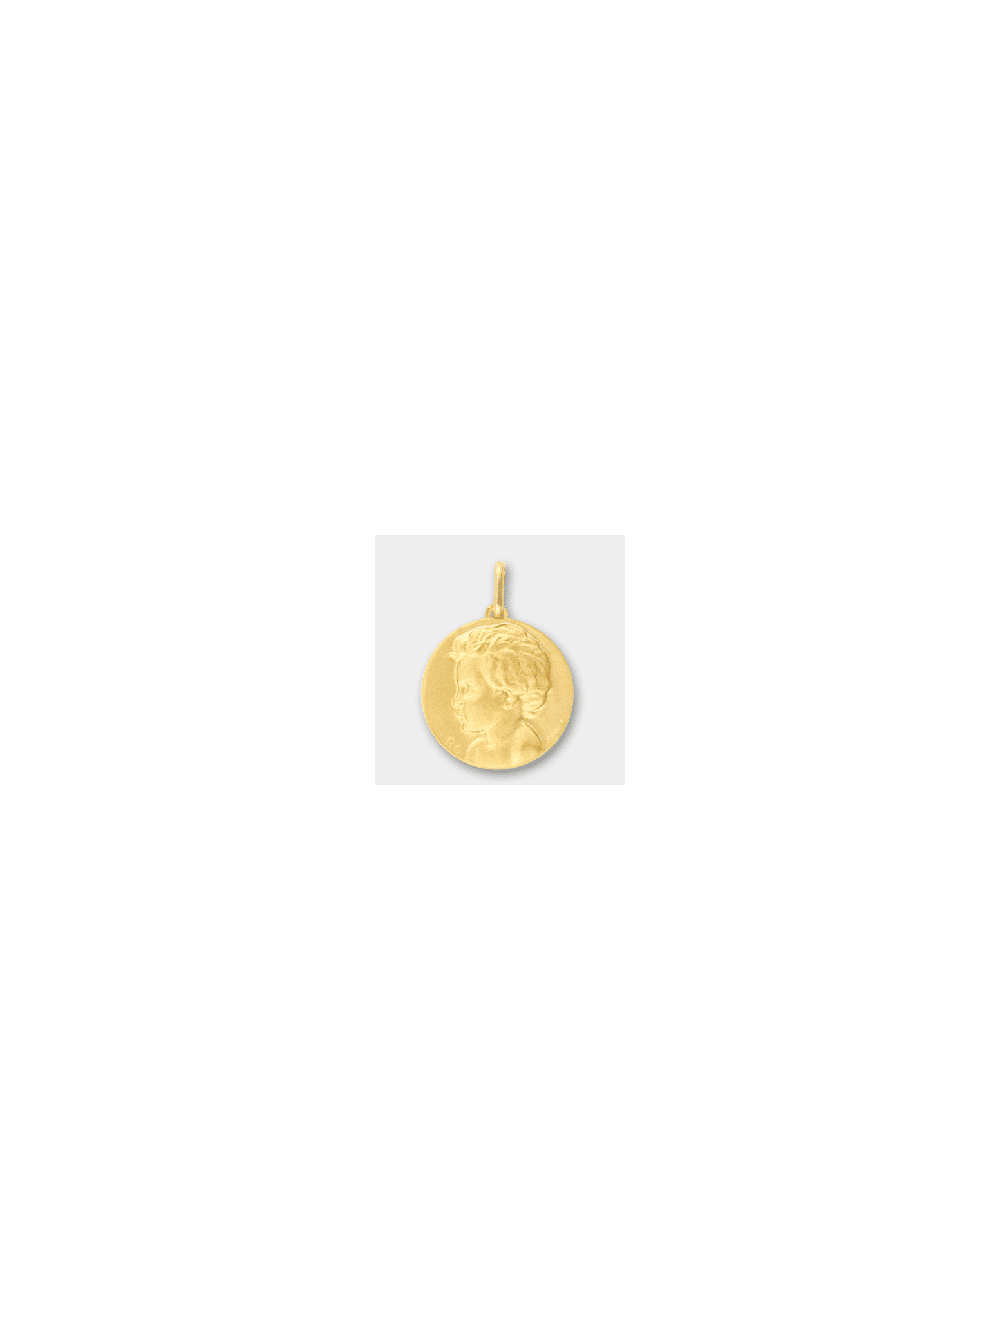 # Medal child yellow gold 1.5cm